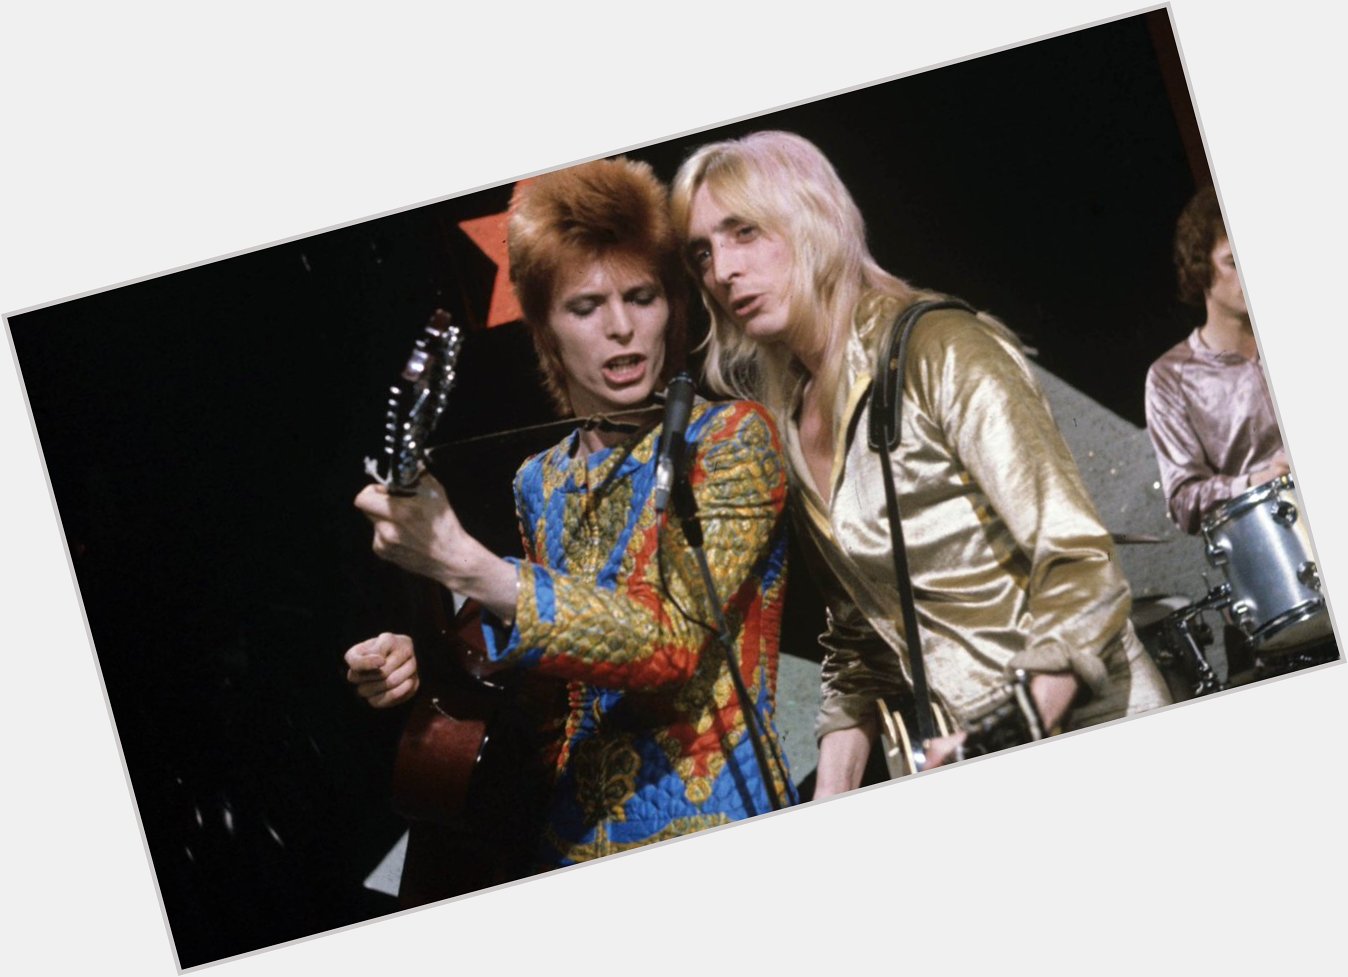 Happy Birthday to the great Mick Ronson. You\d turn 73 today. Never forgotten. Rest in peace, Ronno. Much love. 